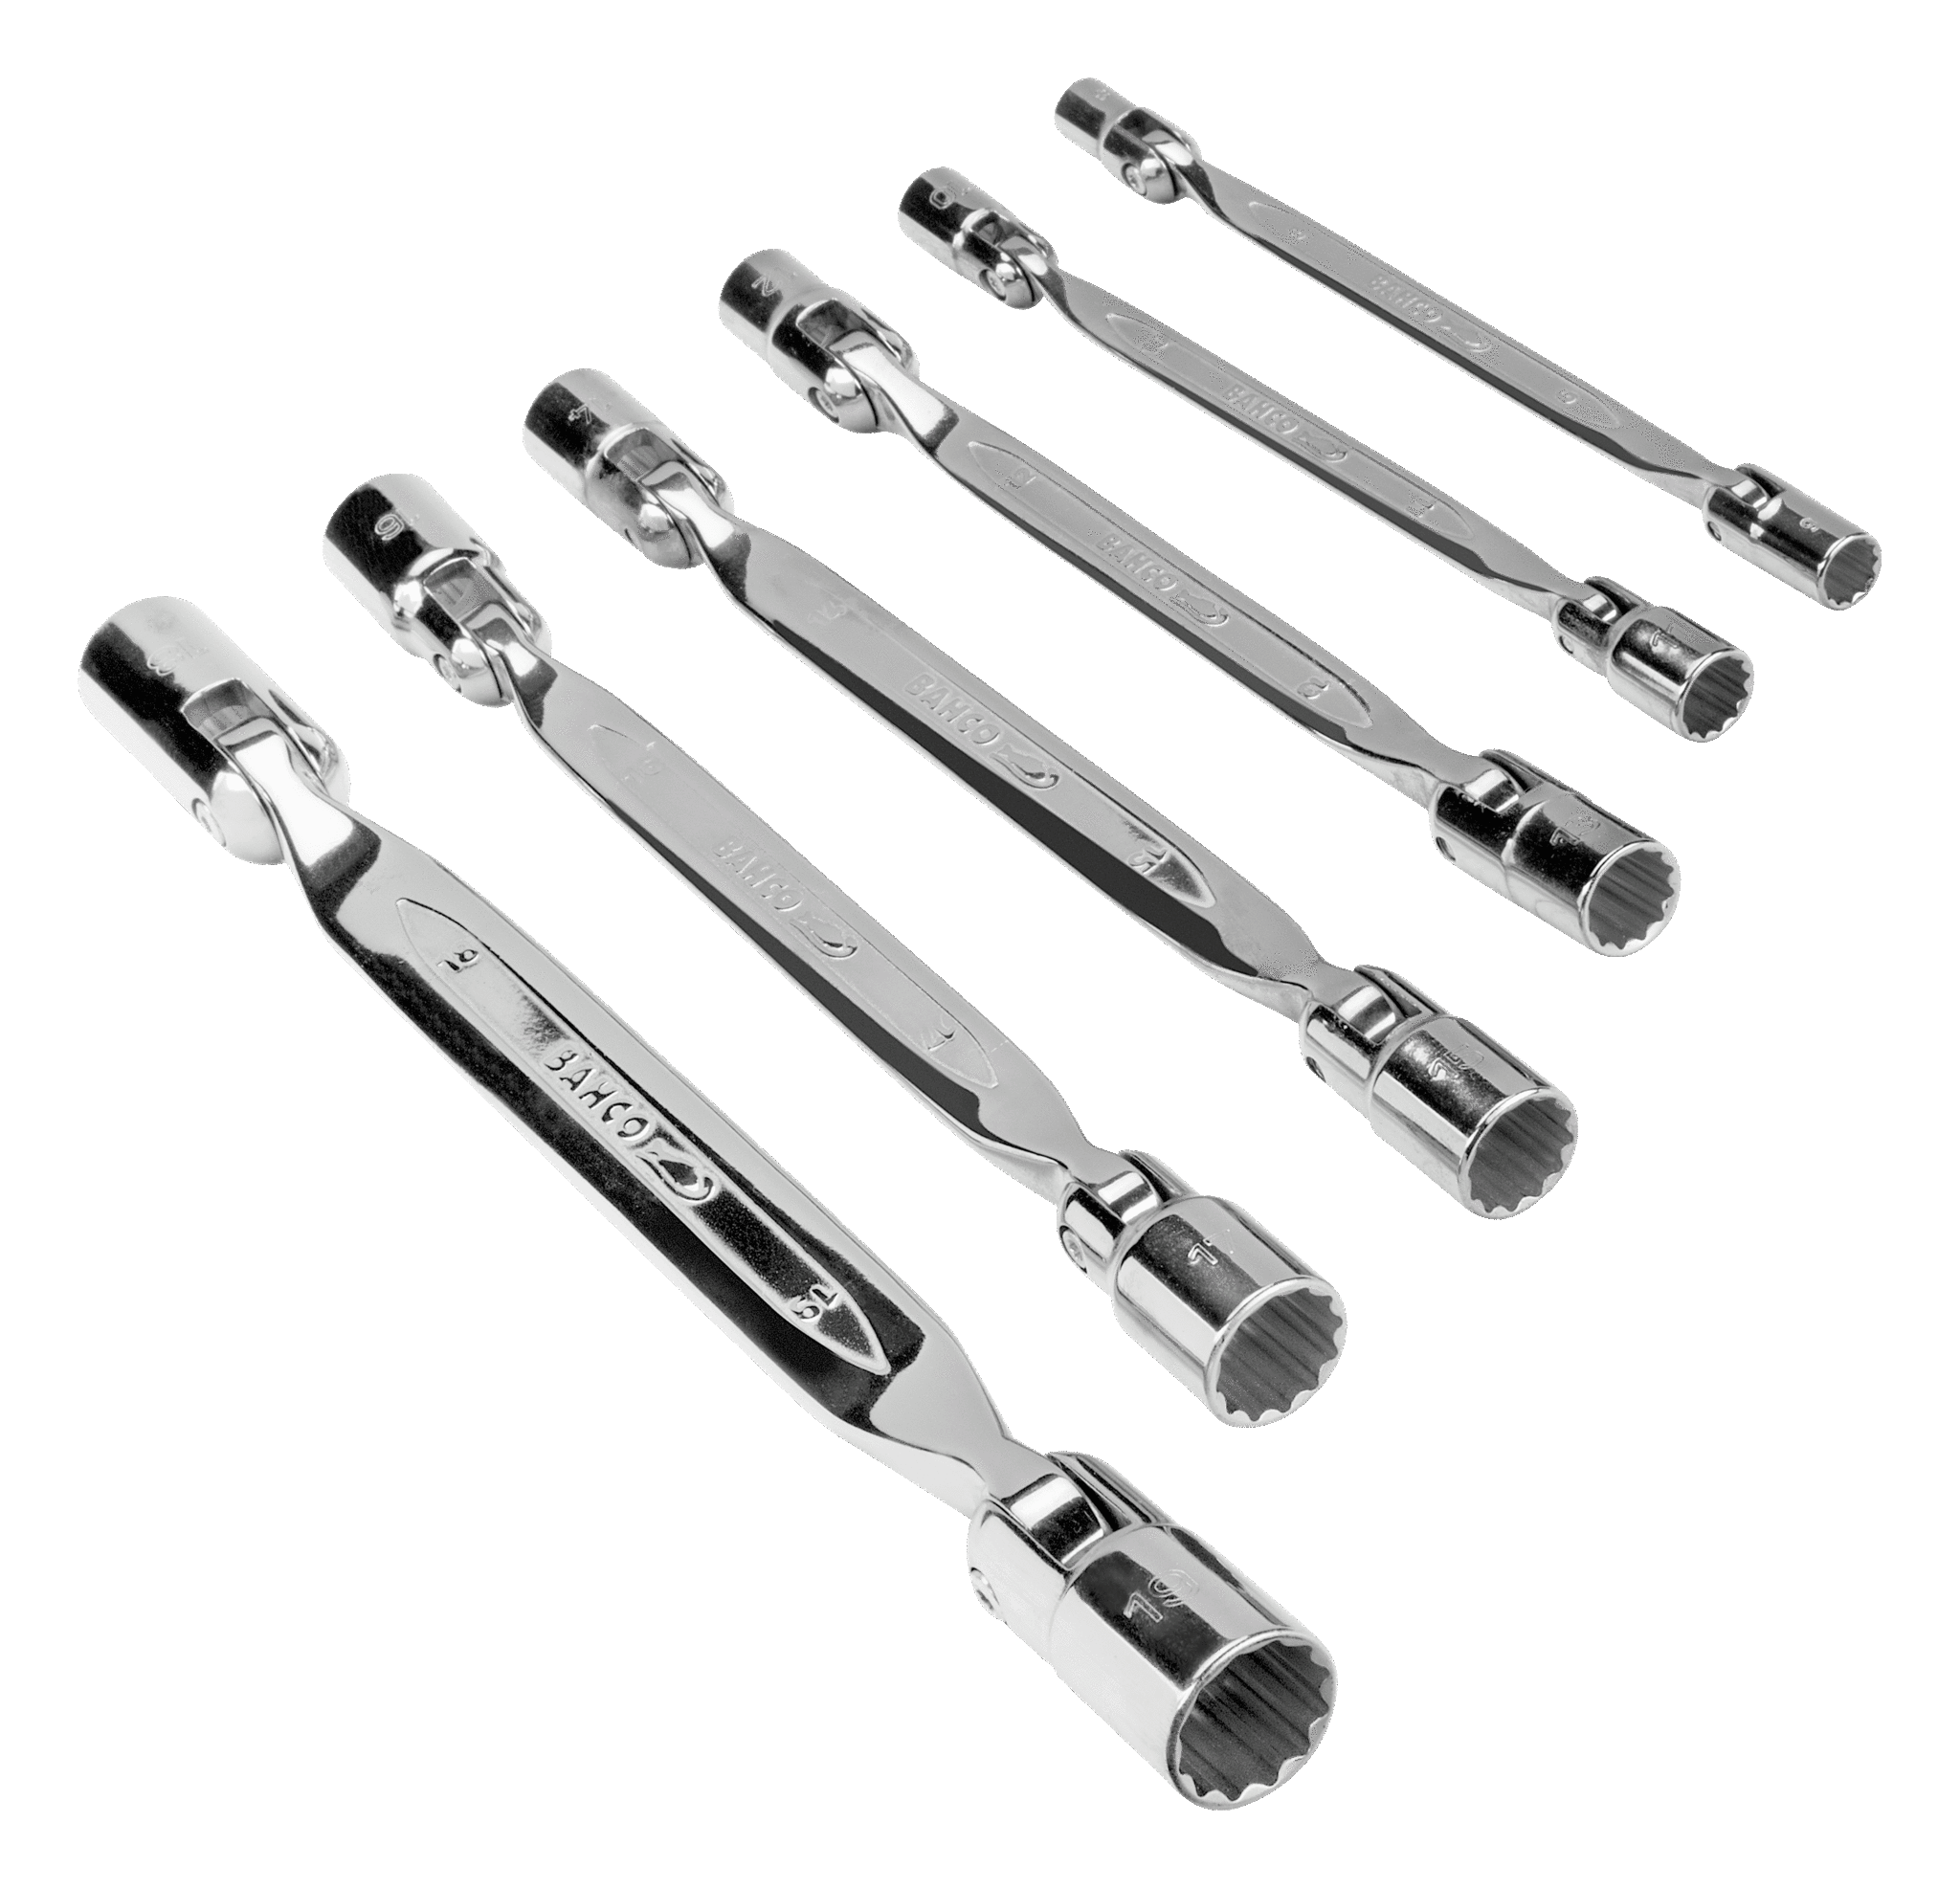 Details about   1/4" Drive 10mm Shallow Socket 4.5" Sliding Wrench 6" Flexible Extension Bar Set 